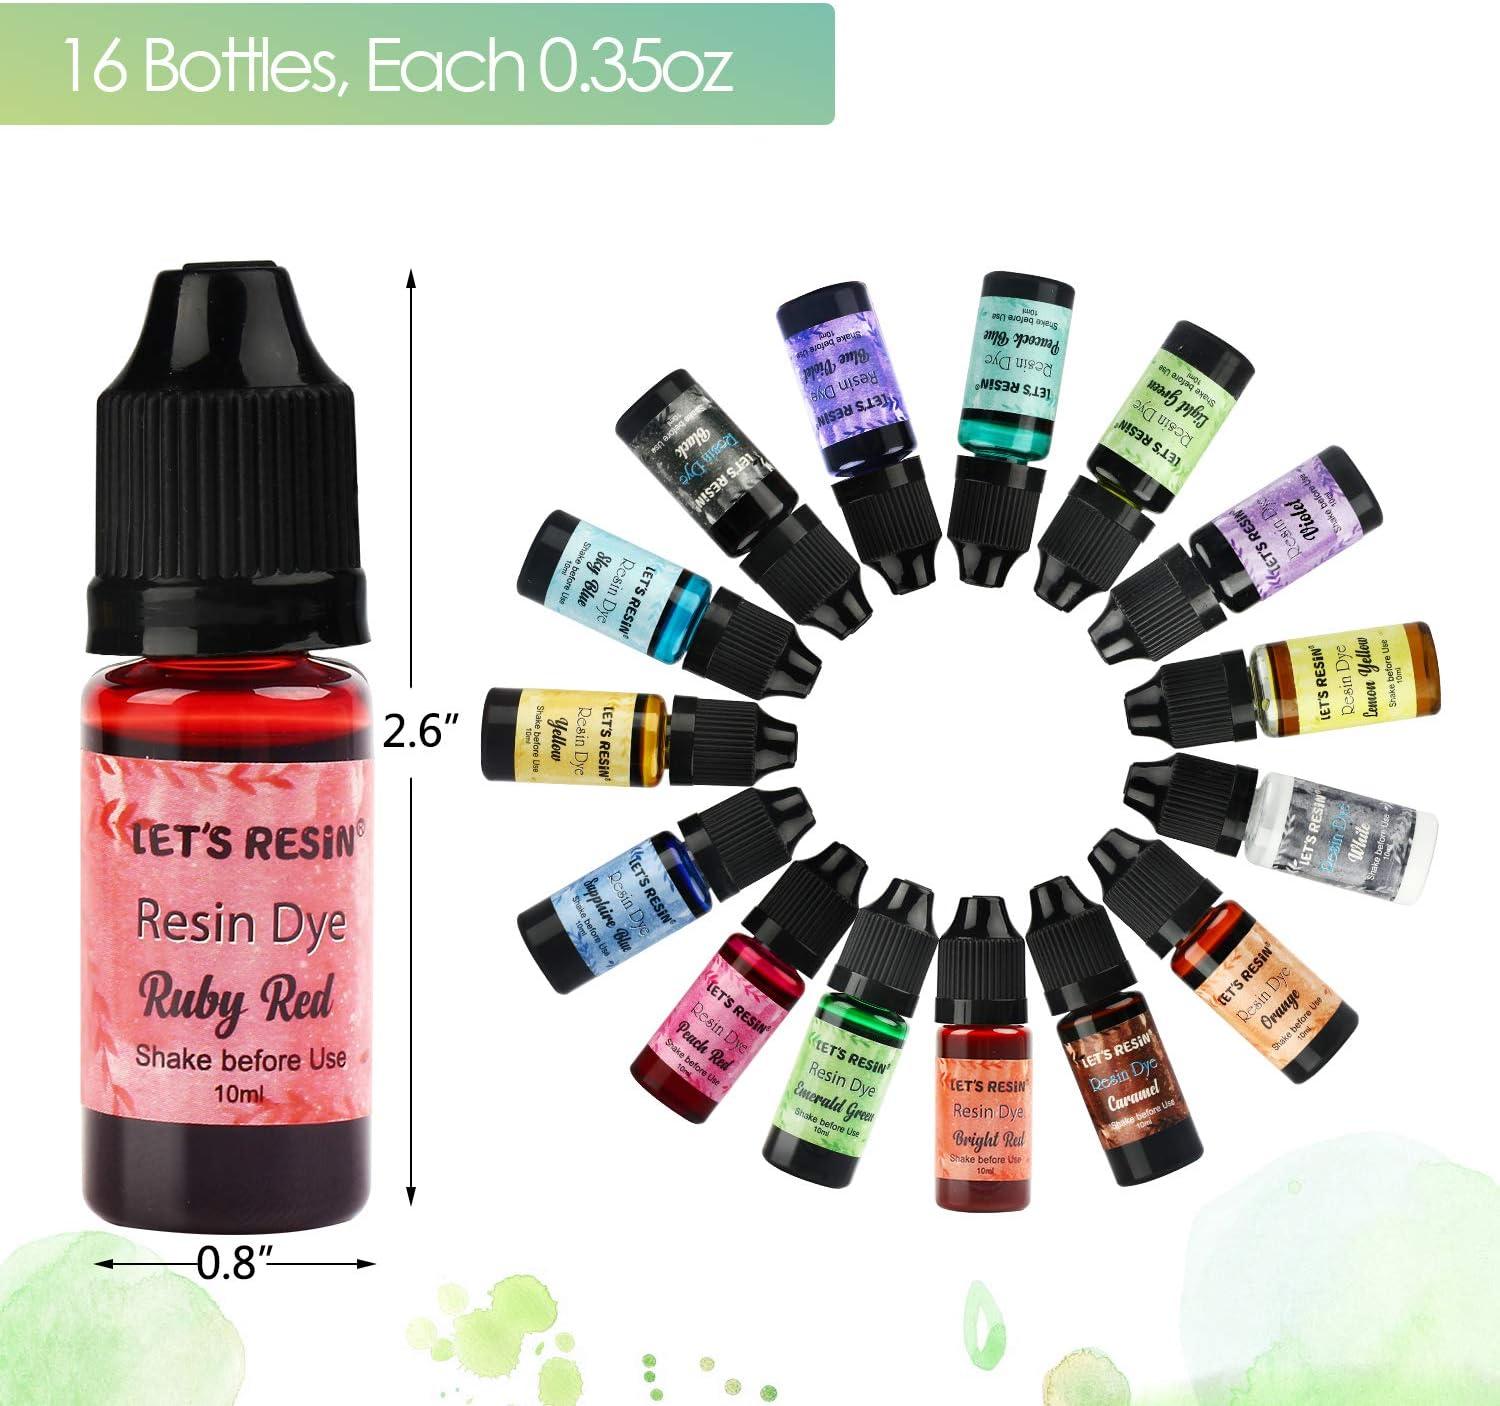  LET'S RESIN Epoxy Resin Paint Pigment 16 Color Concentrated  Liquid Epoxy Resin Dye, Colorant for Resin Coloring, Resin Jewelry, Resin  Art Crafts DIY Making (Each 0.35oz) : Arts, Crafts & Sewing